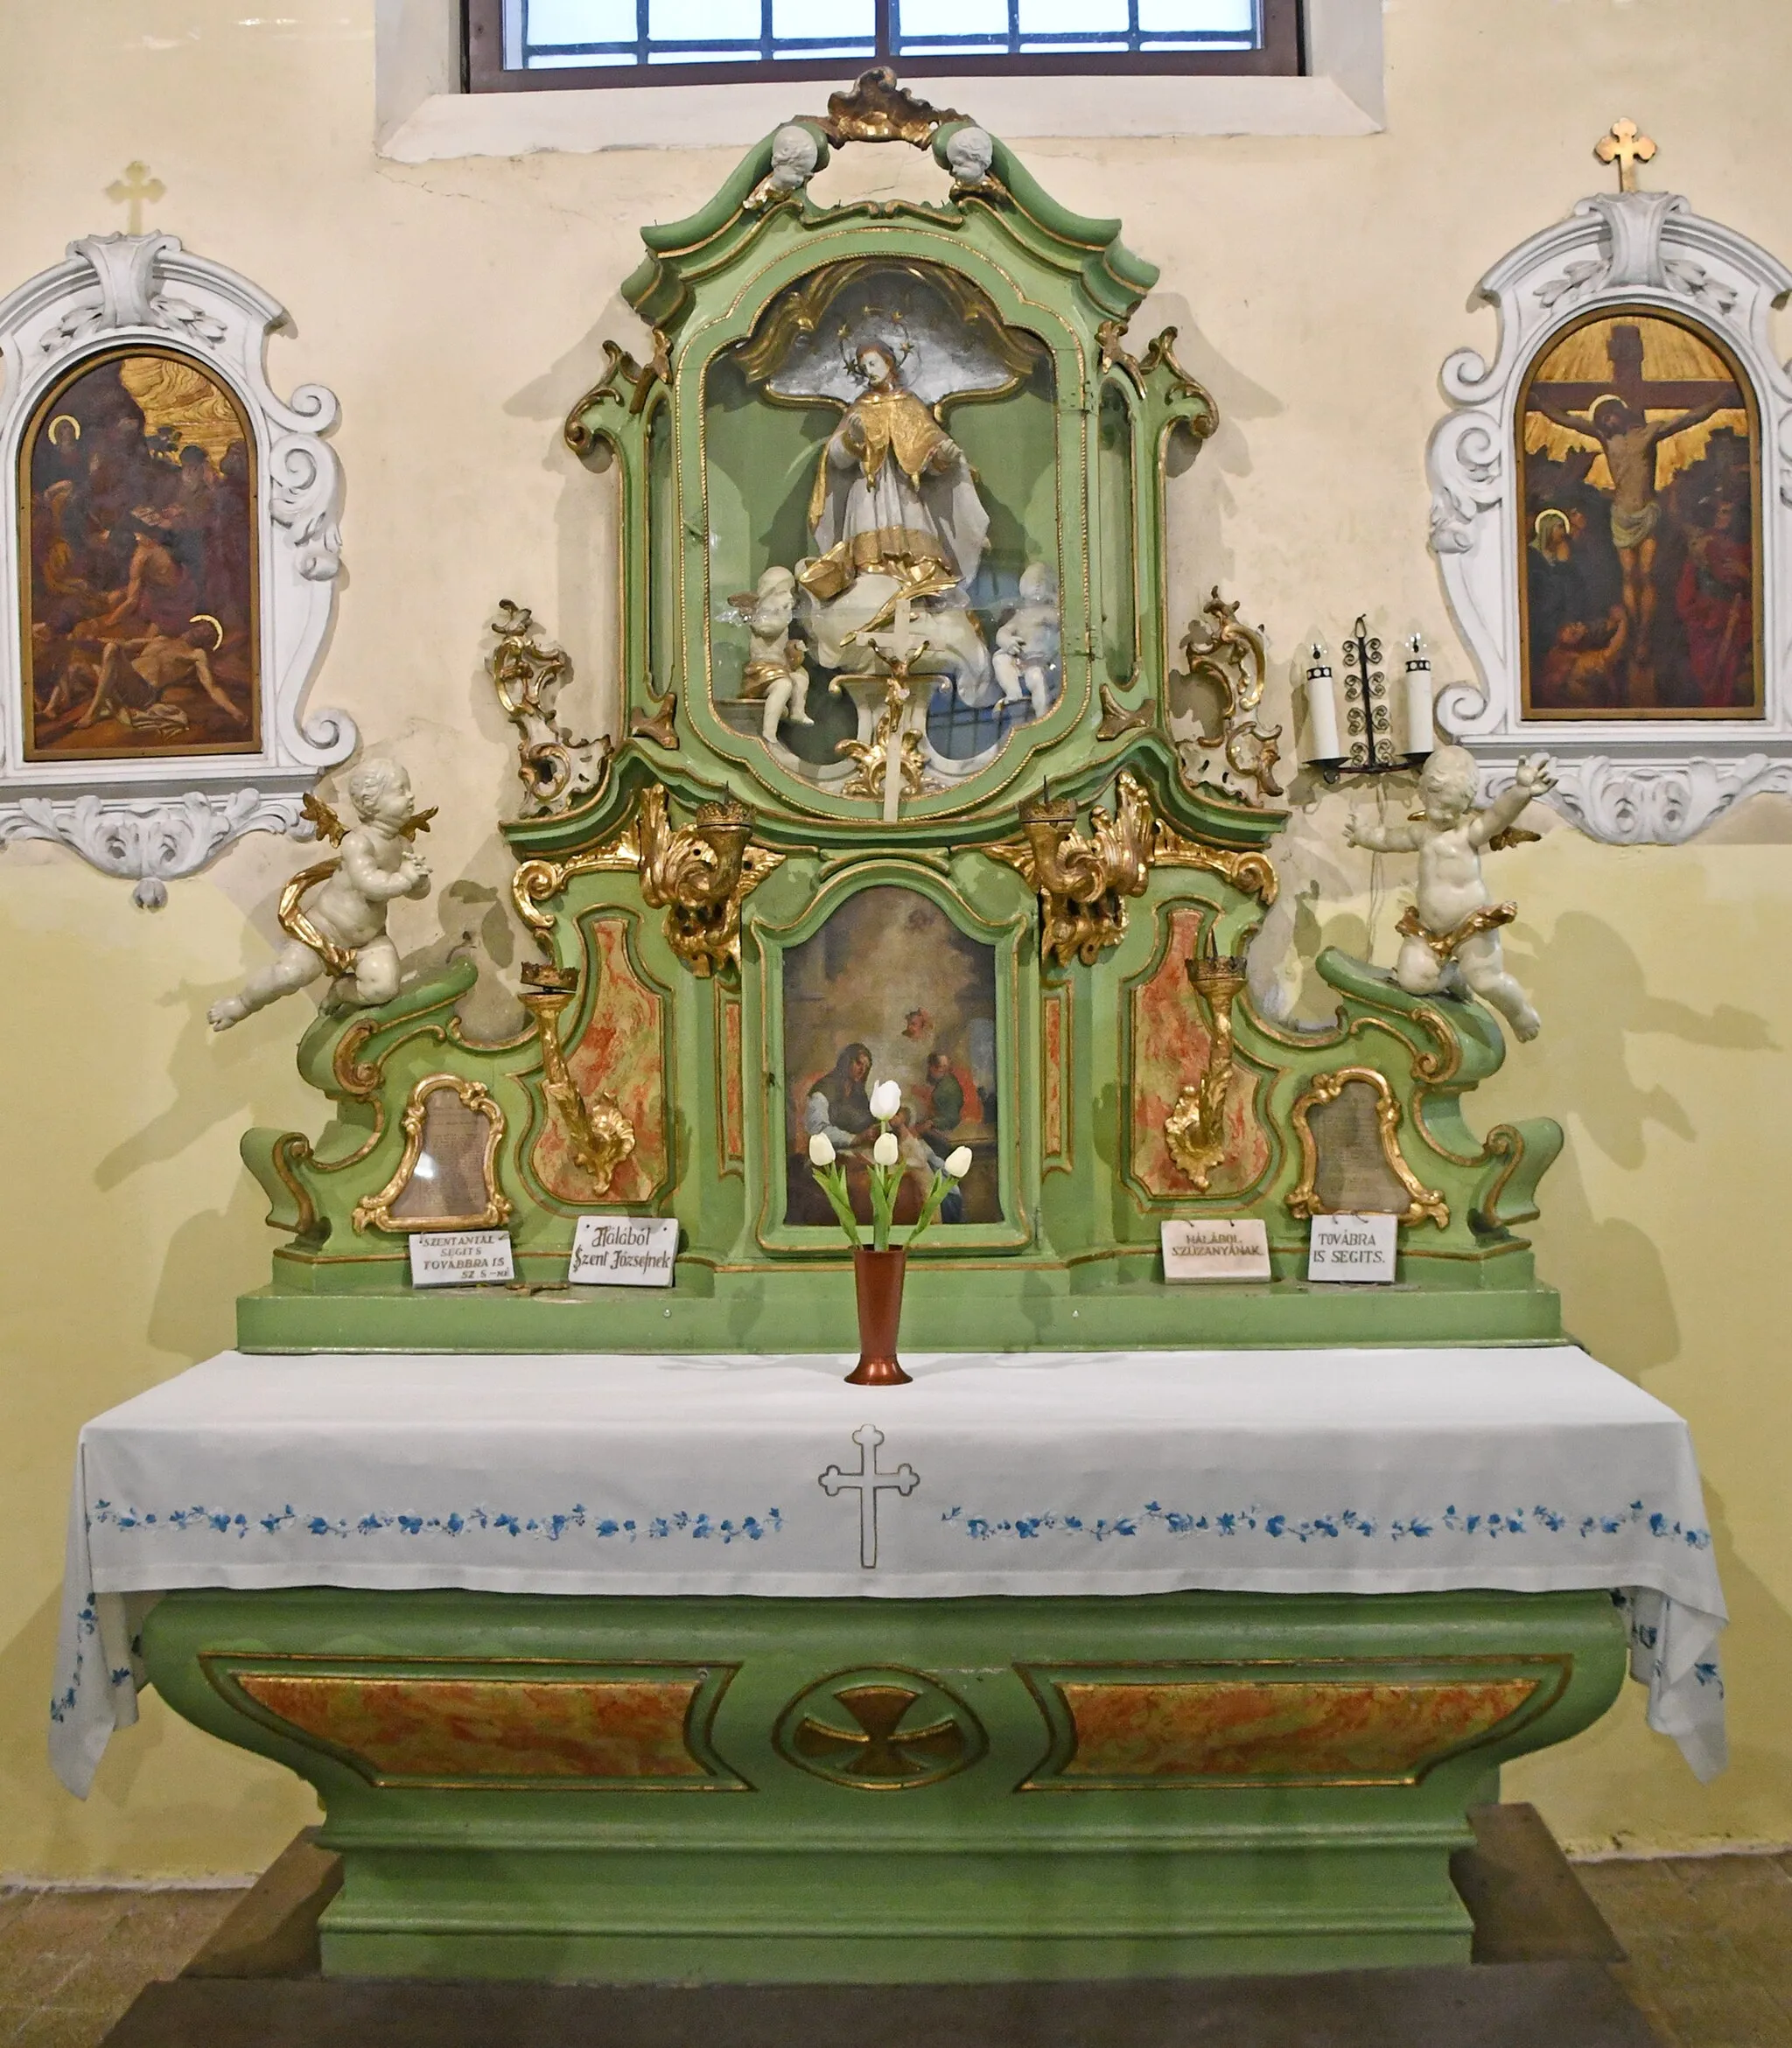 Photo showing: Altar of Saint John of Nepomuk in the Roman Catholic church of Perkáta, Hungary
Rococo style from the end of the 18th century